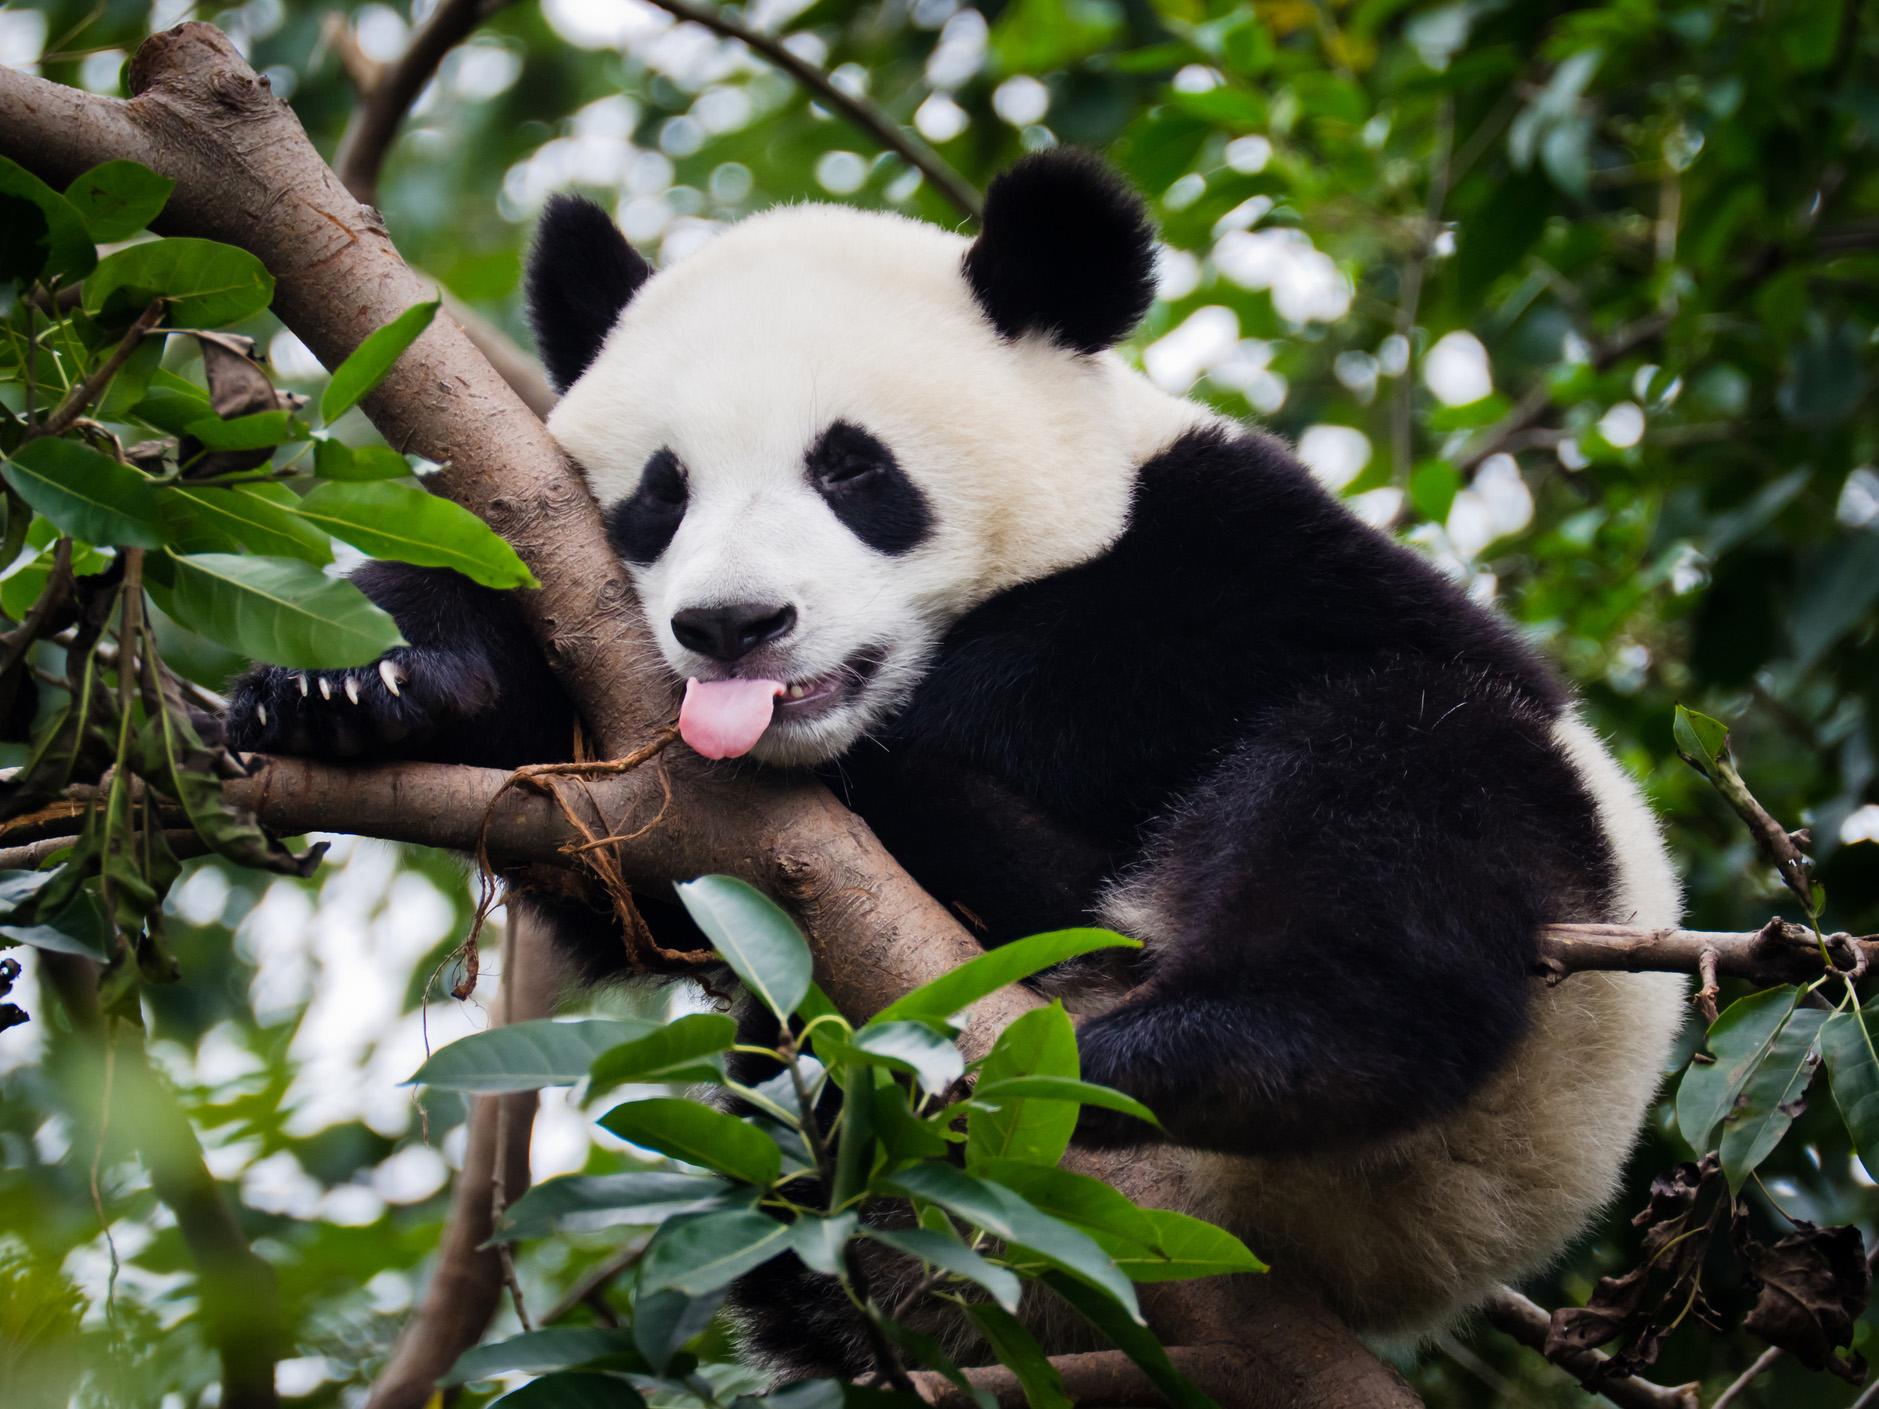 Sichuan is home to the giant panda